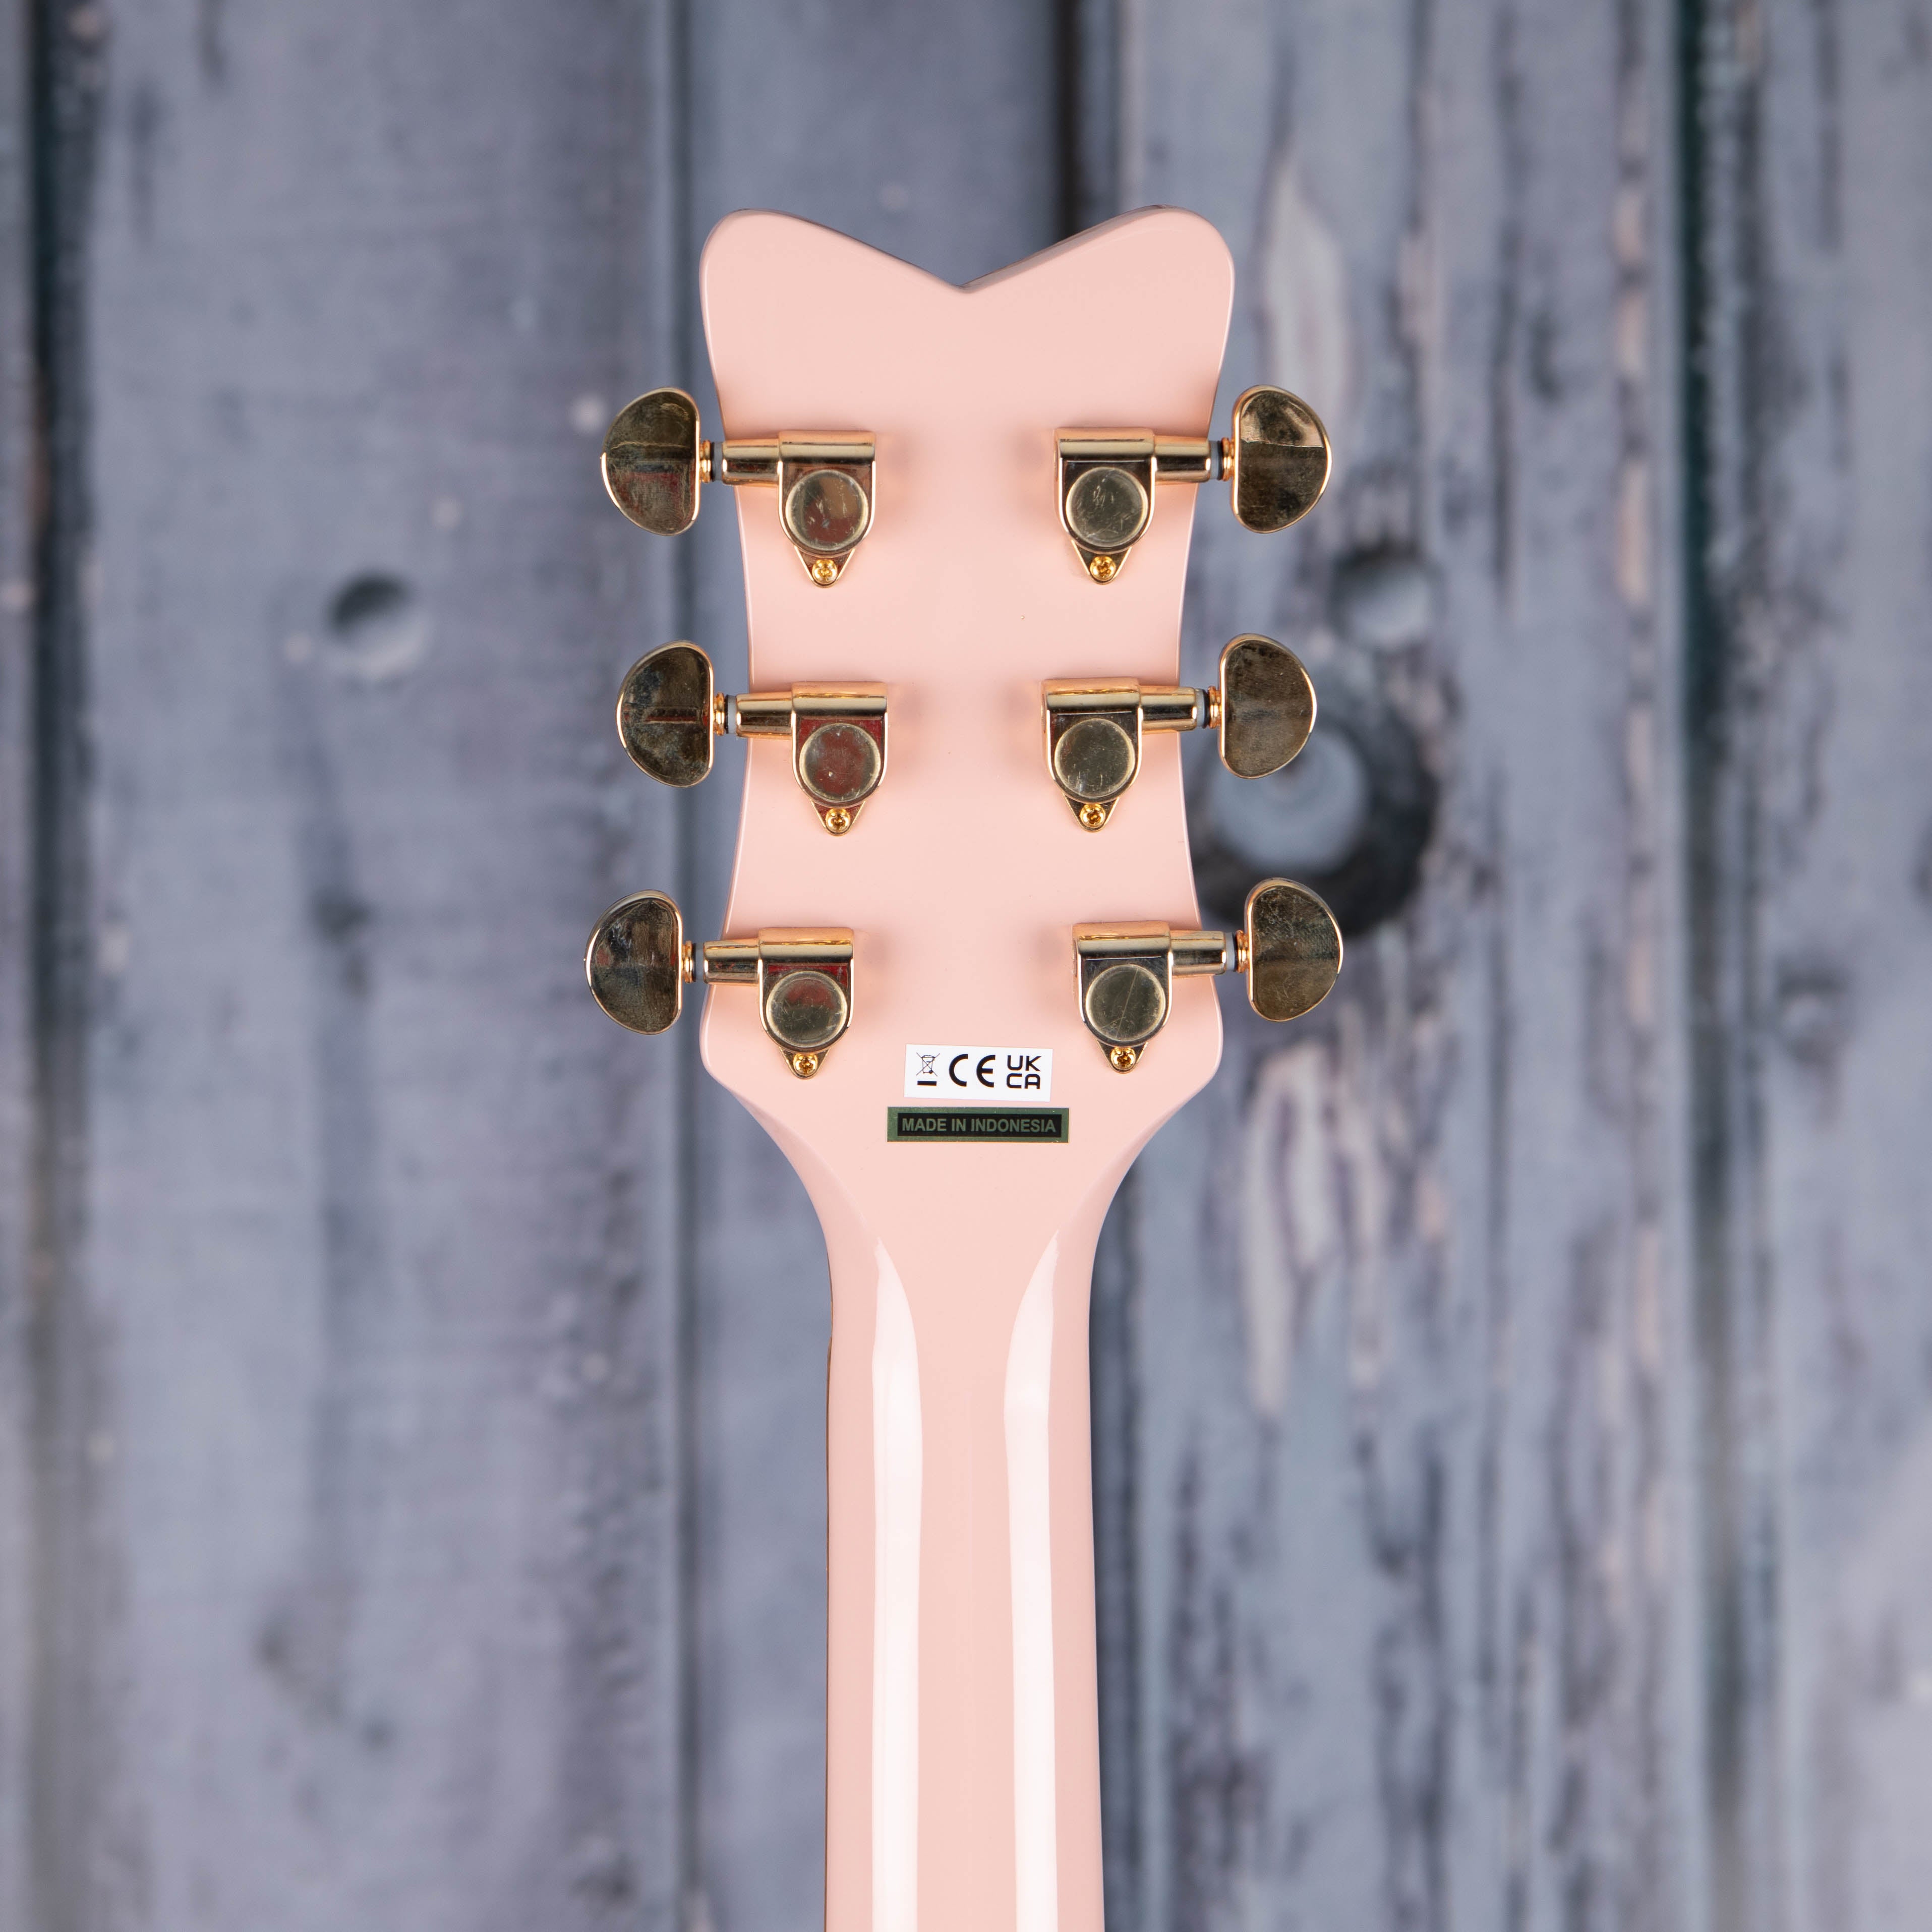 Gretsch G5021E Rancher Penguin Parlor Acoustic/Electric Guitar, Shell Pink, back headstock